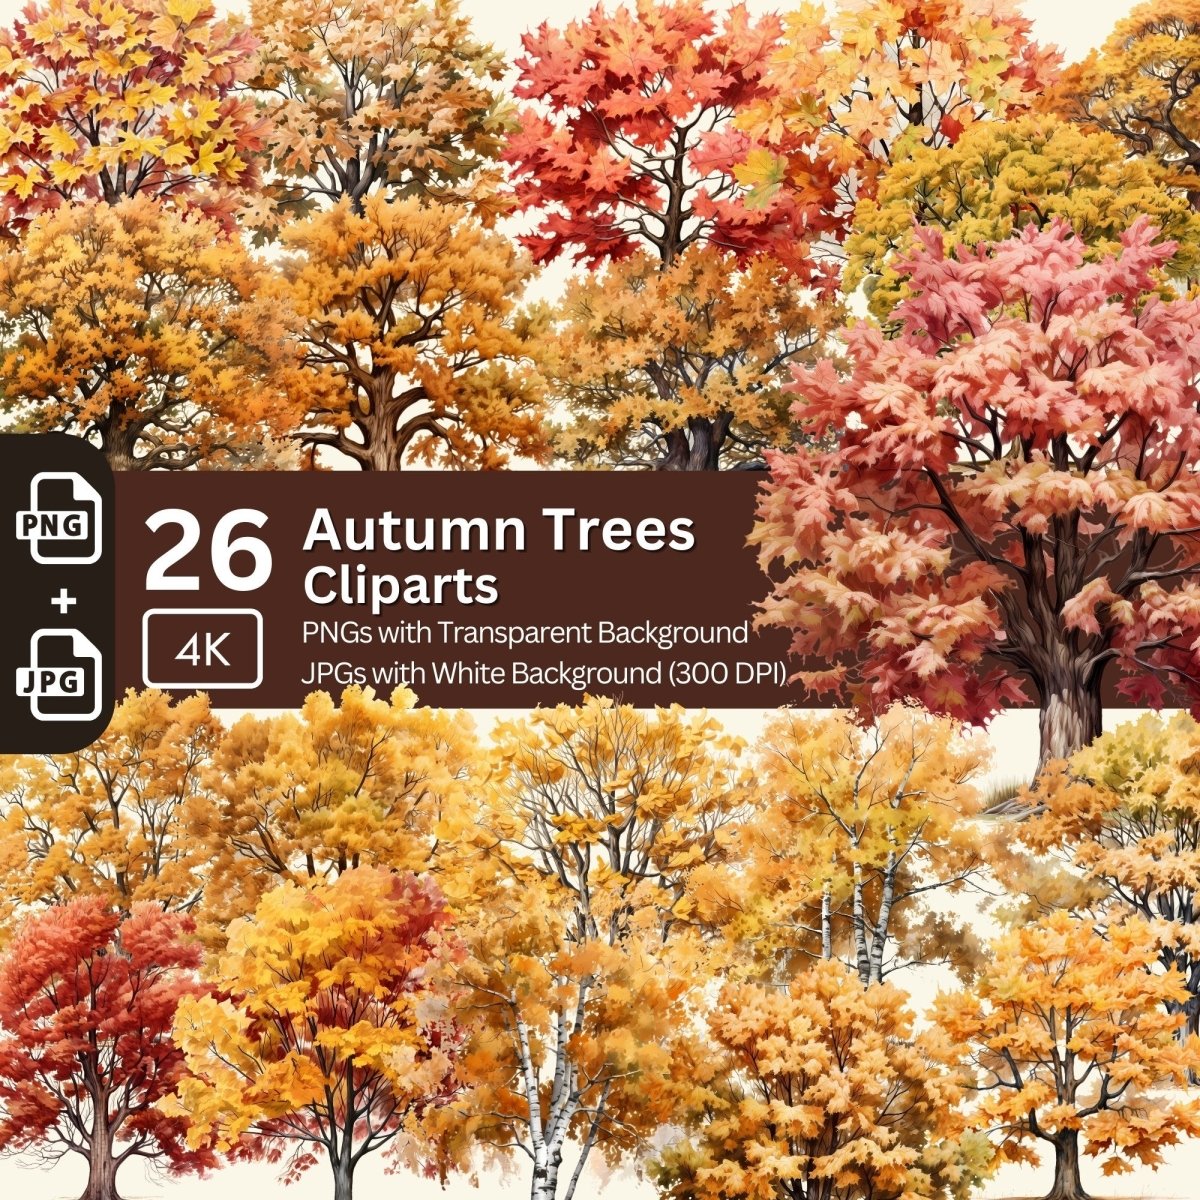 Autumn Trees Clipart 26 PNG Bundle Fall Images Seasonal Clipart Card Making Digital Paper Craft Watercolor Fall Tree Junk Journal Kit - Everything Pixel